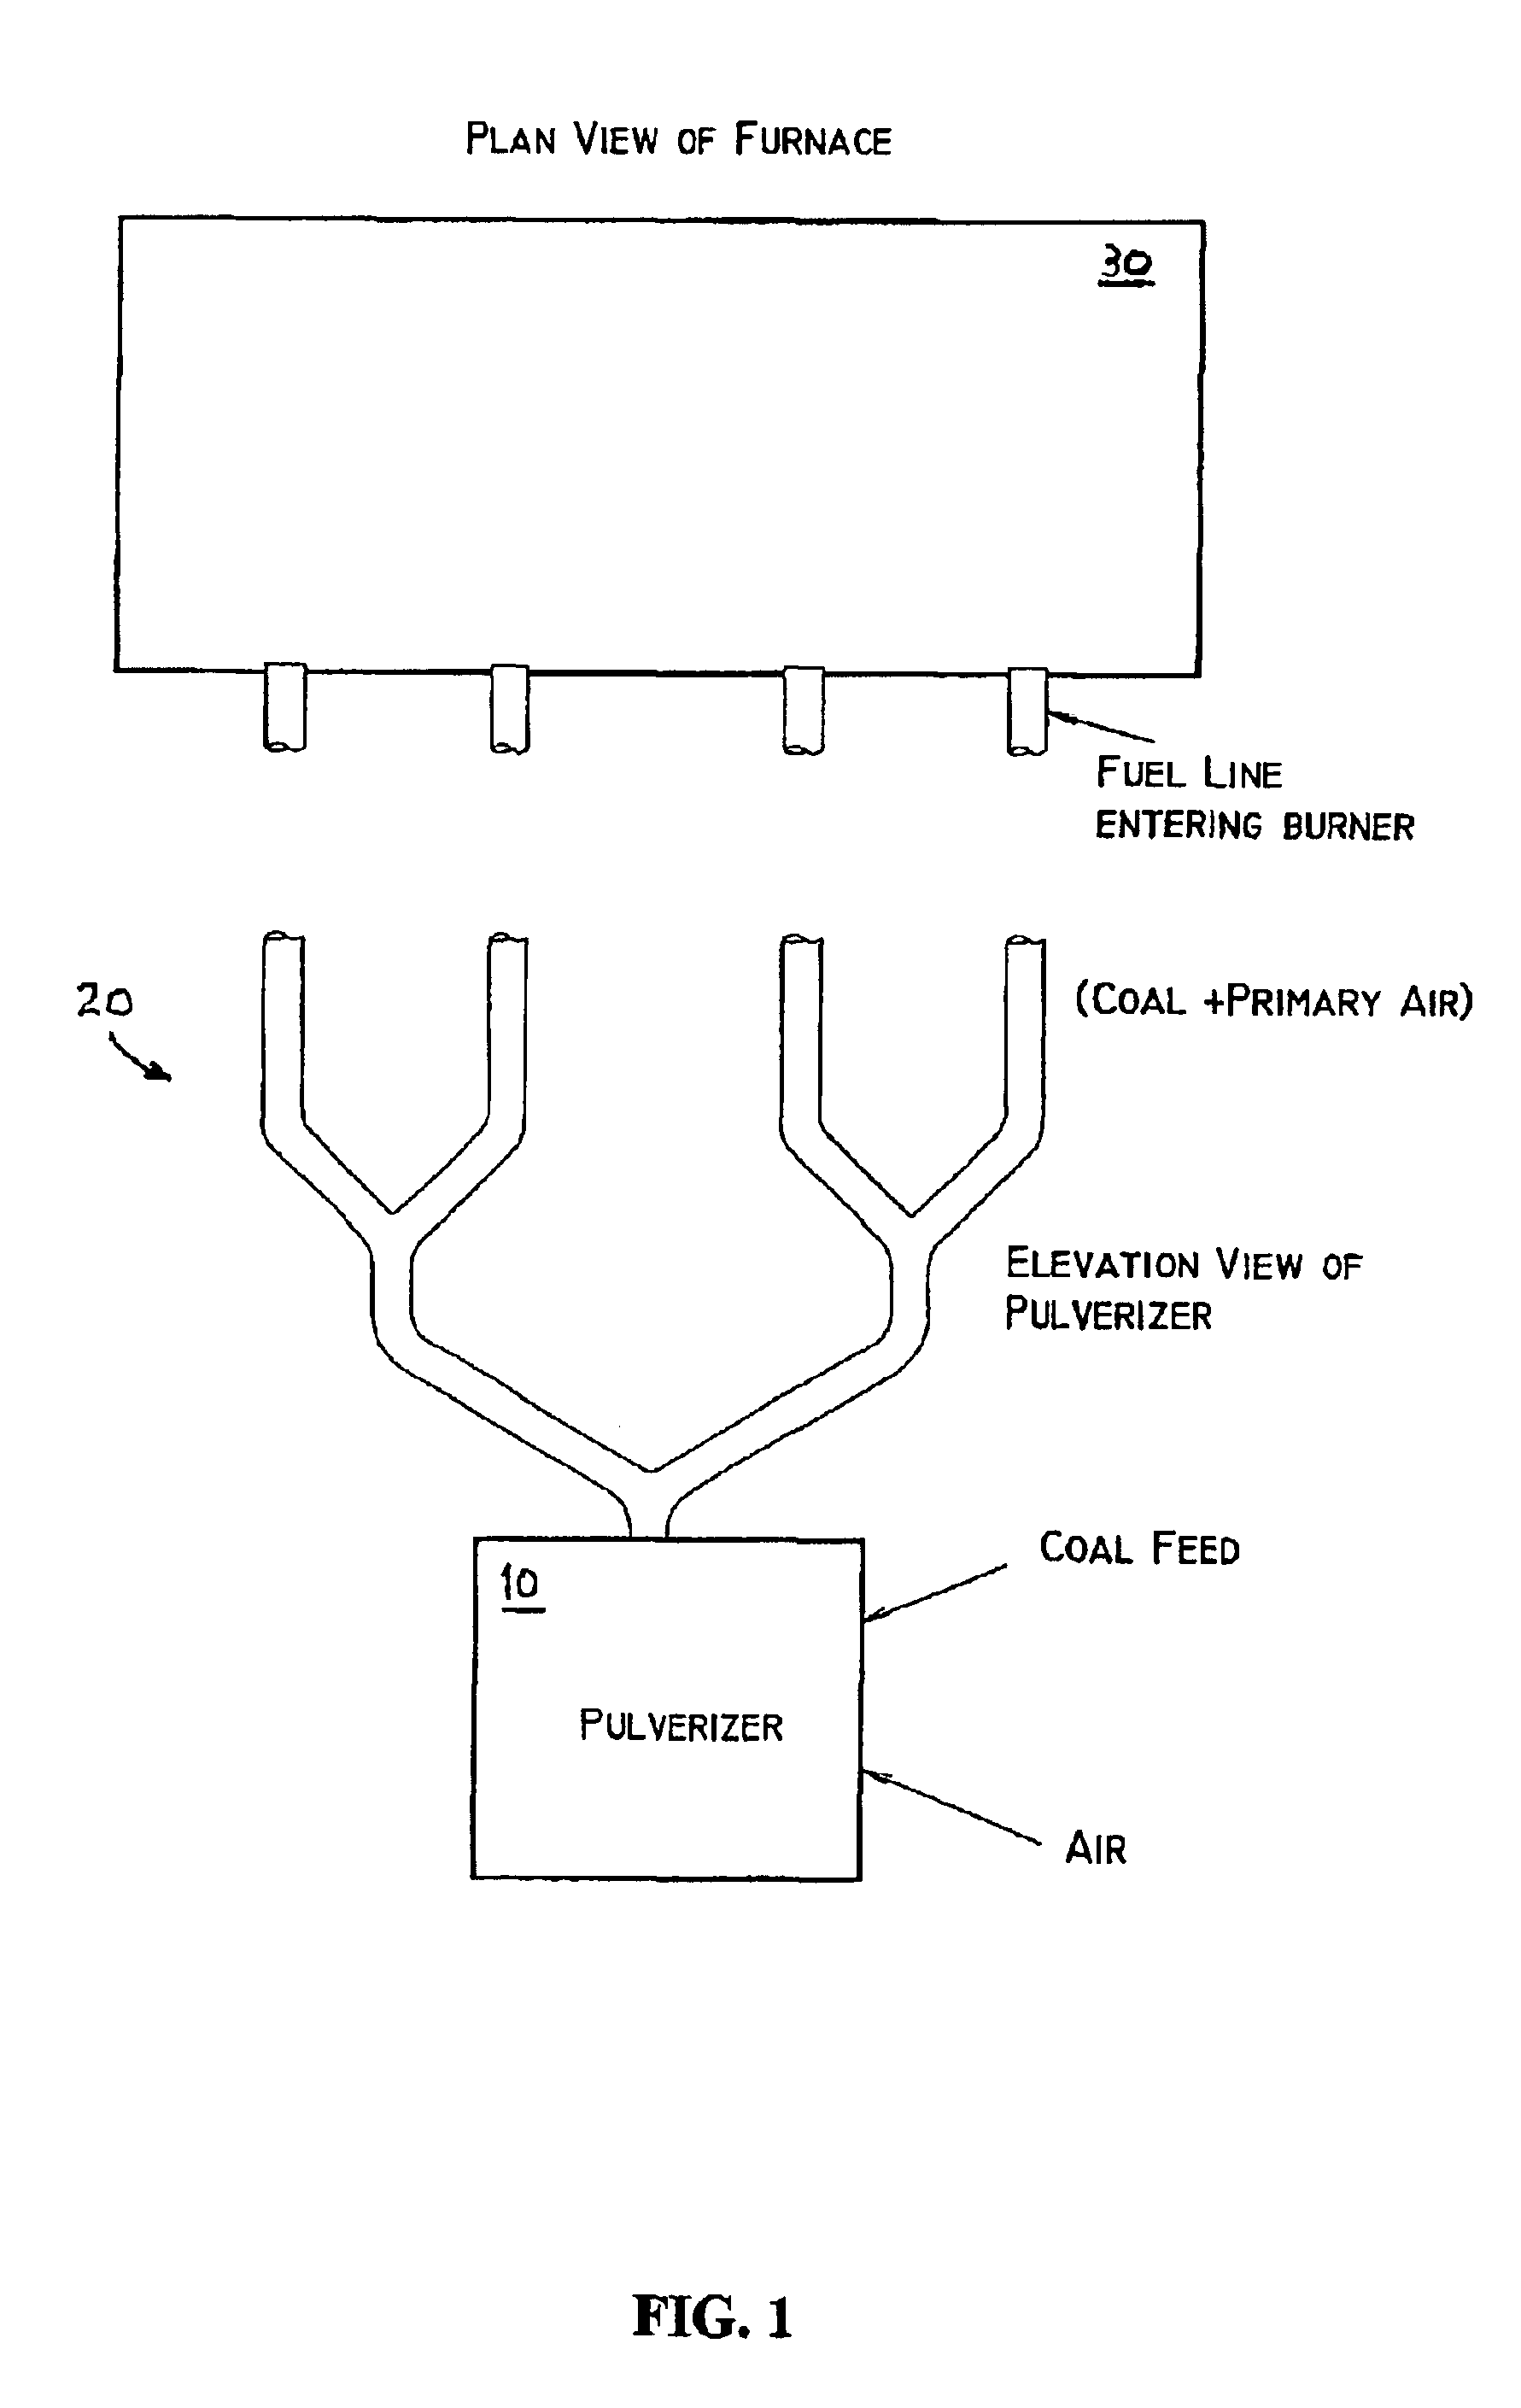 Adjustable flow control elements for balancing pulverized coal flow at coal pipe splitter junctions